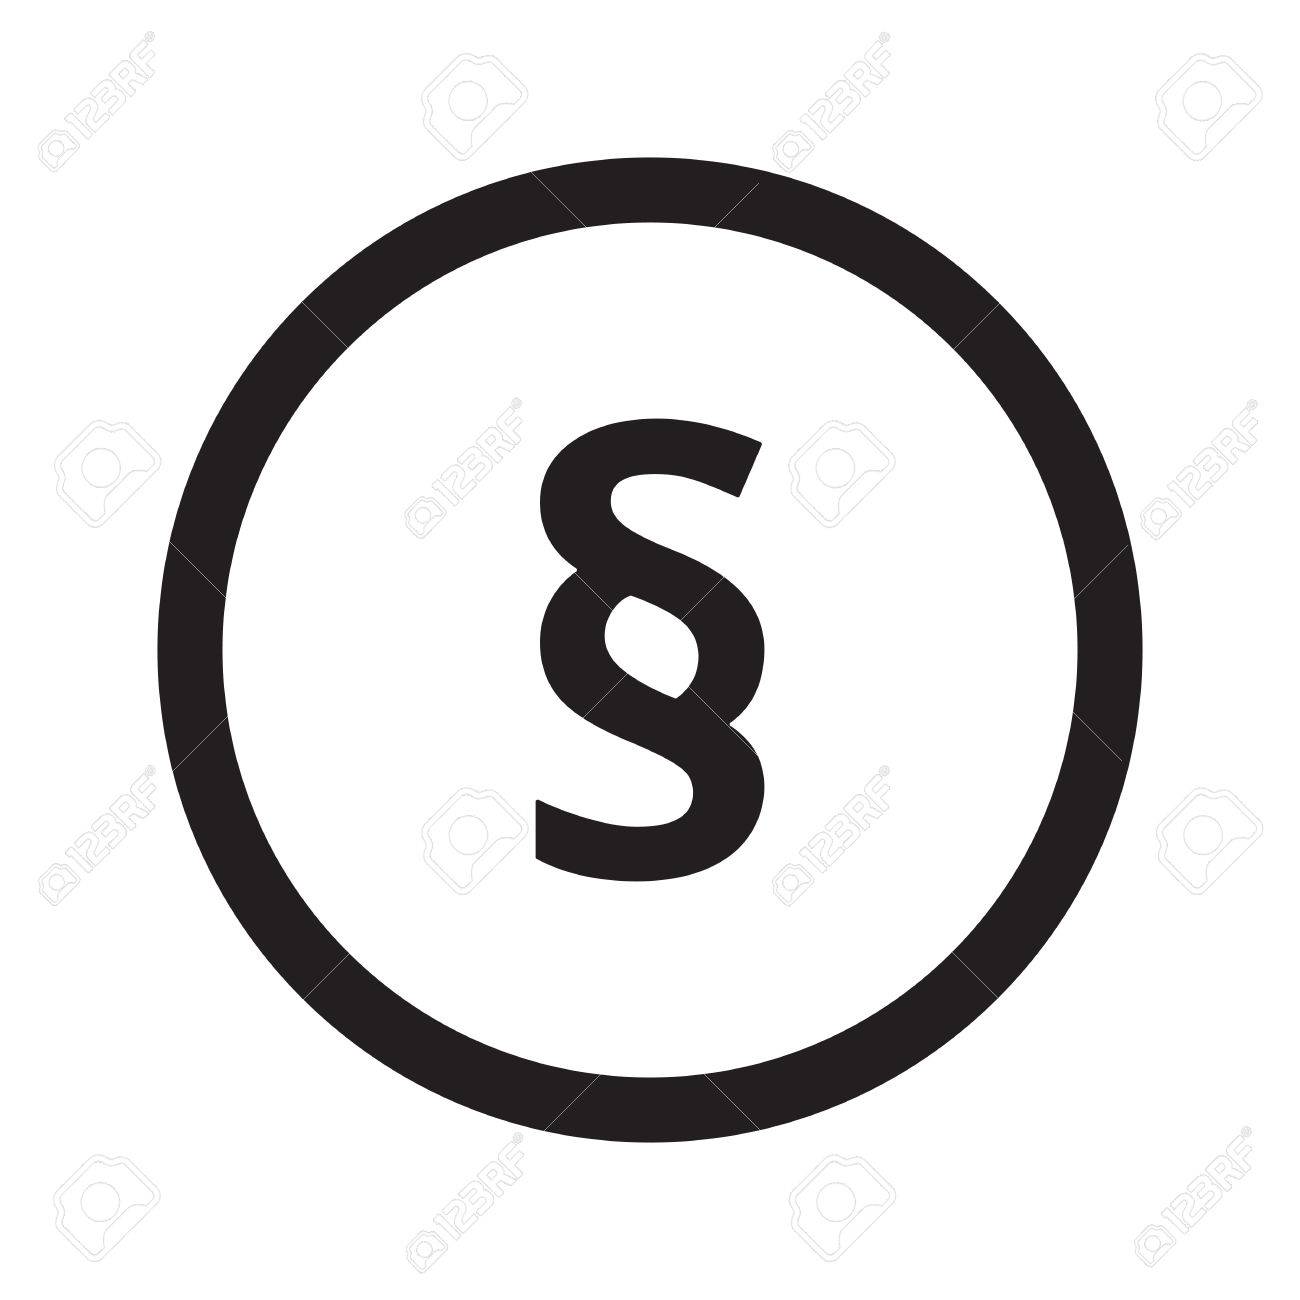 Flat Black Paragraph Web Icon In Circle On White Background 